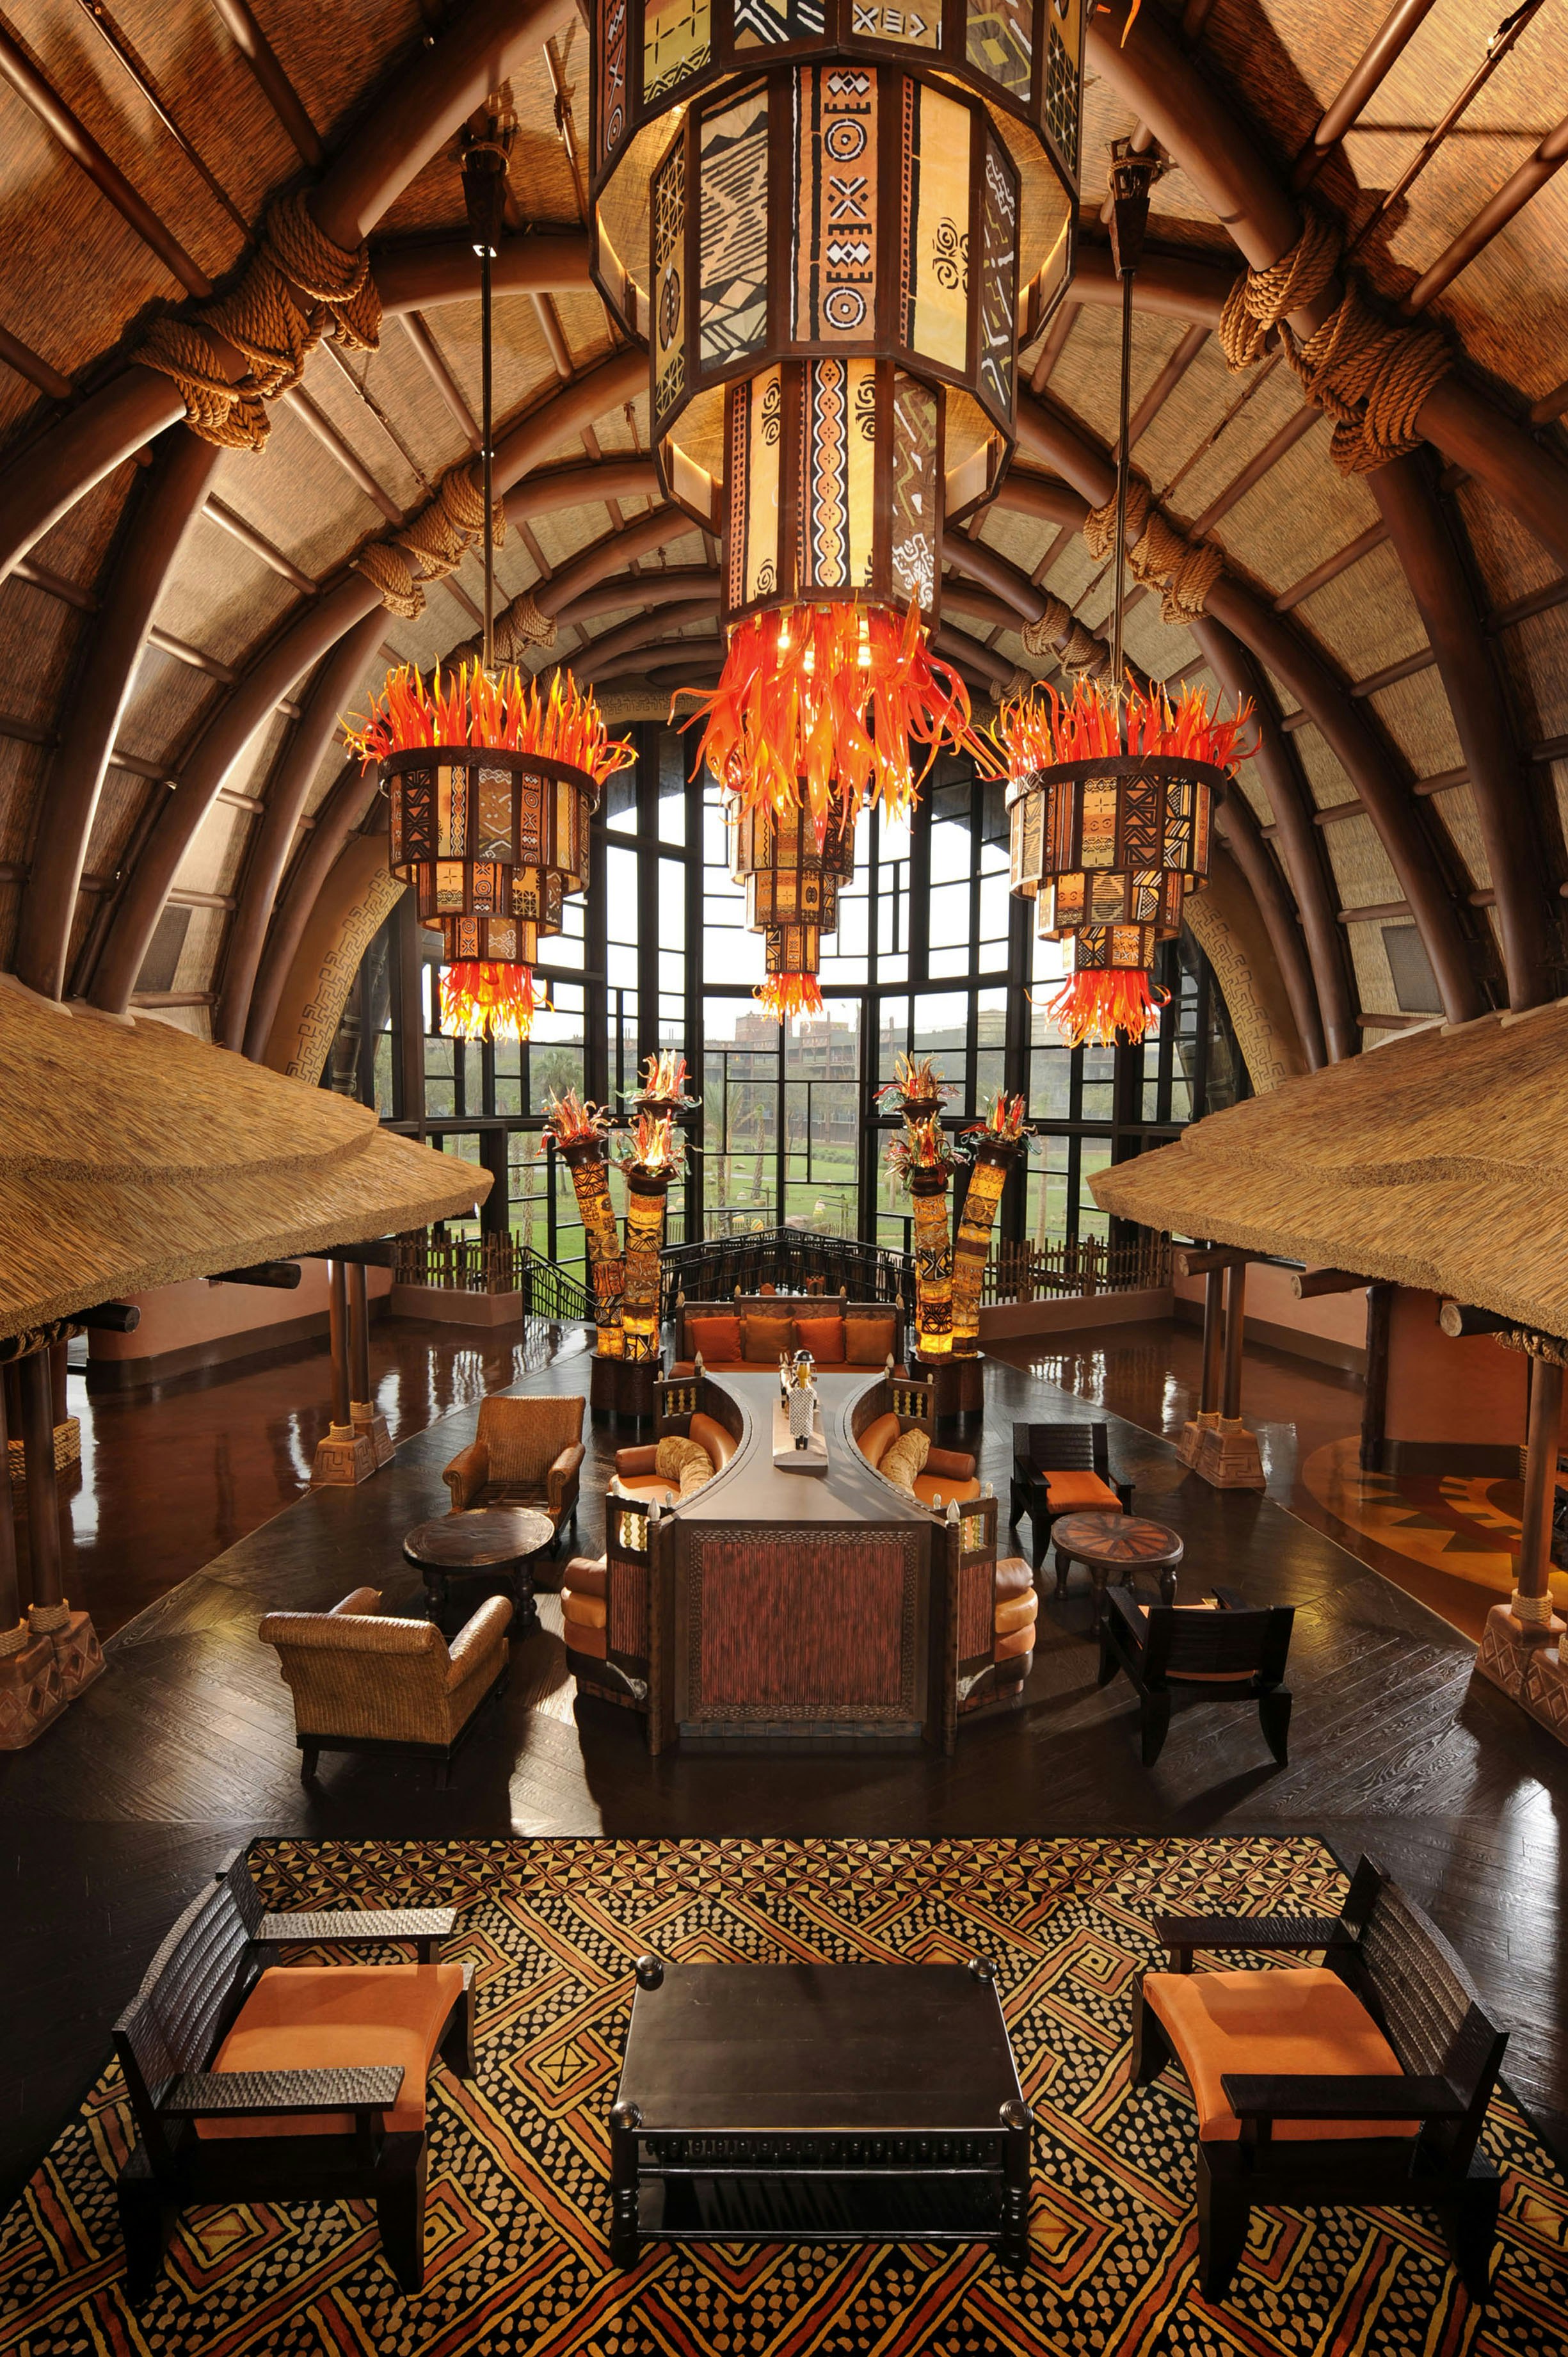 A hotel lobby with arching windows, Africa-inspired art, floor lamps and hand-carved wooden columns